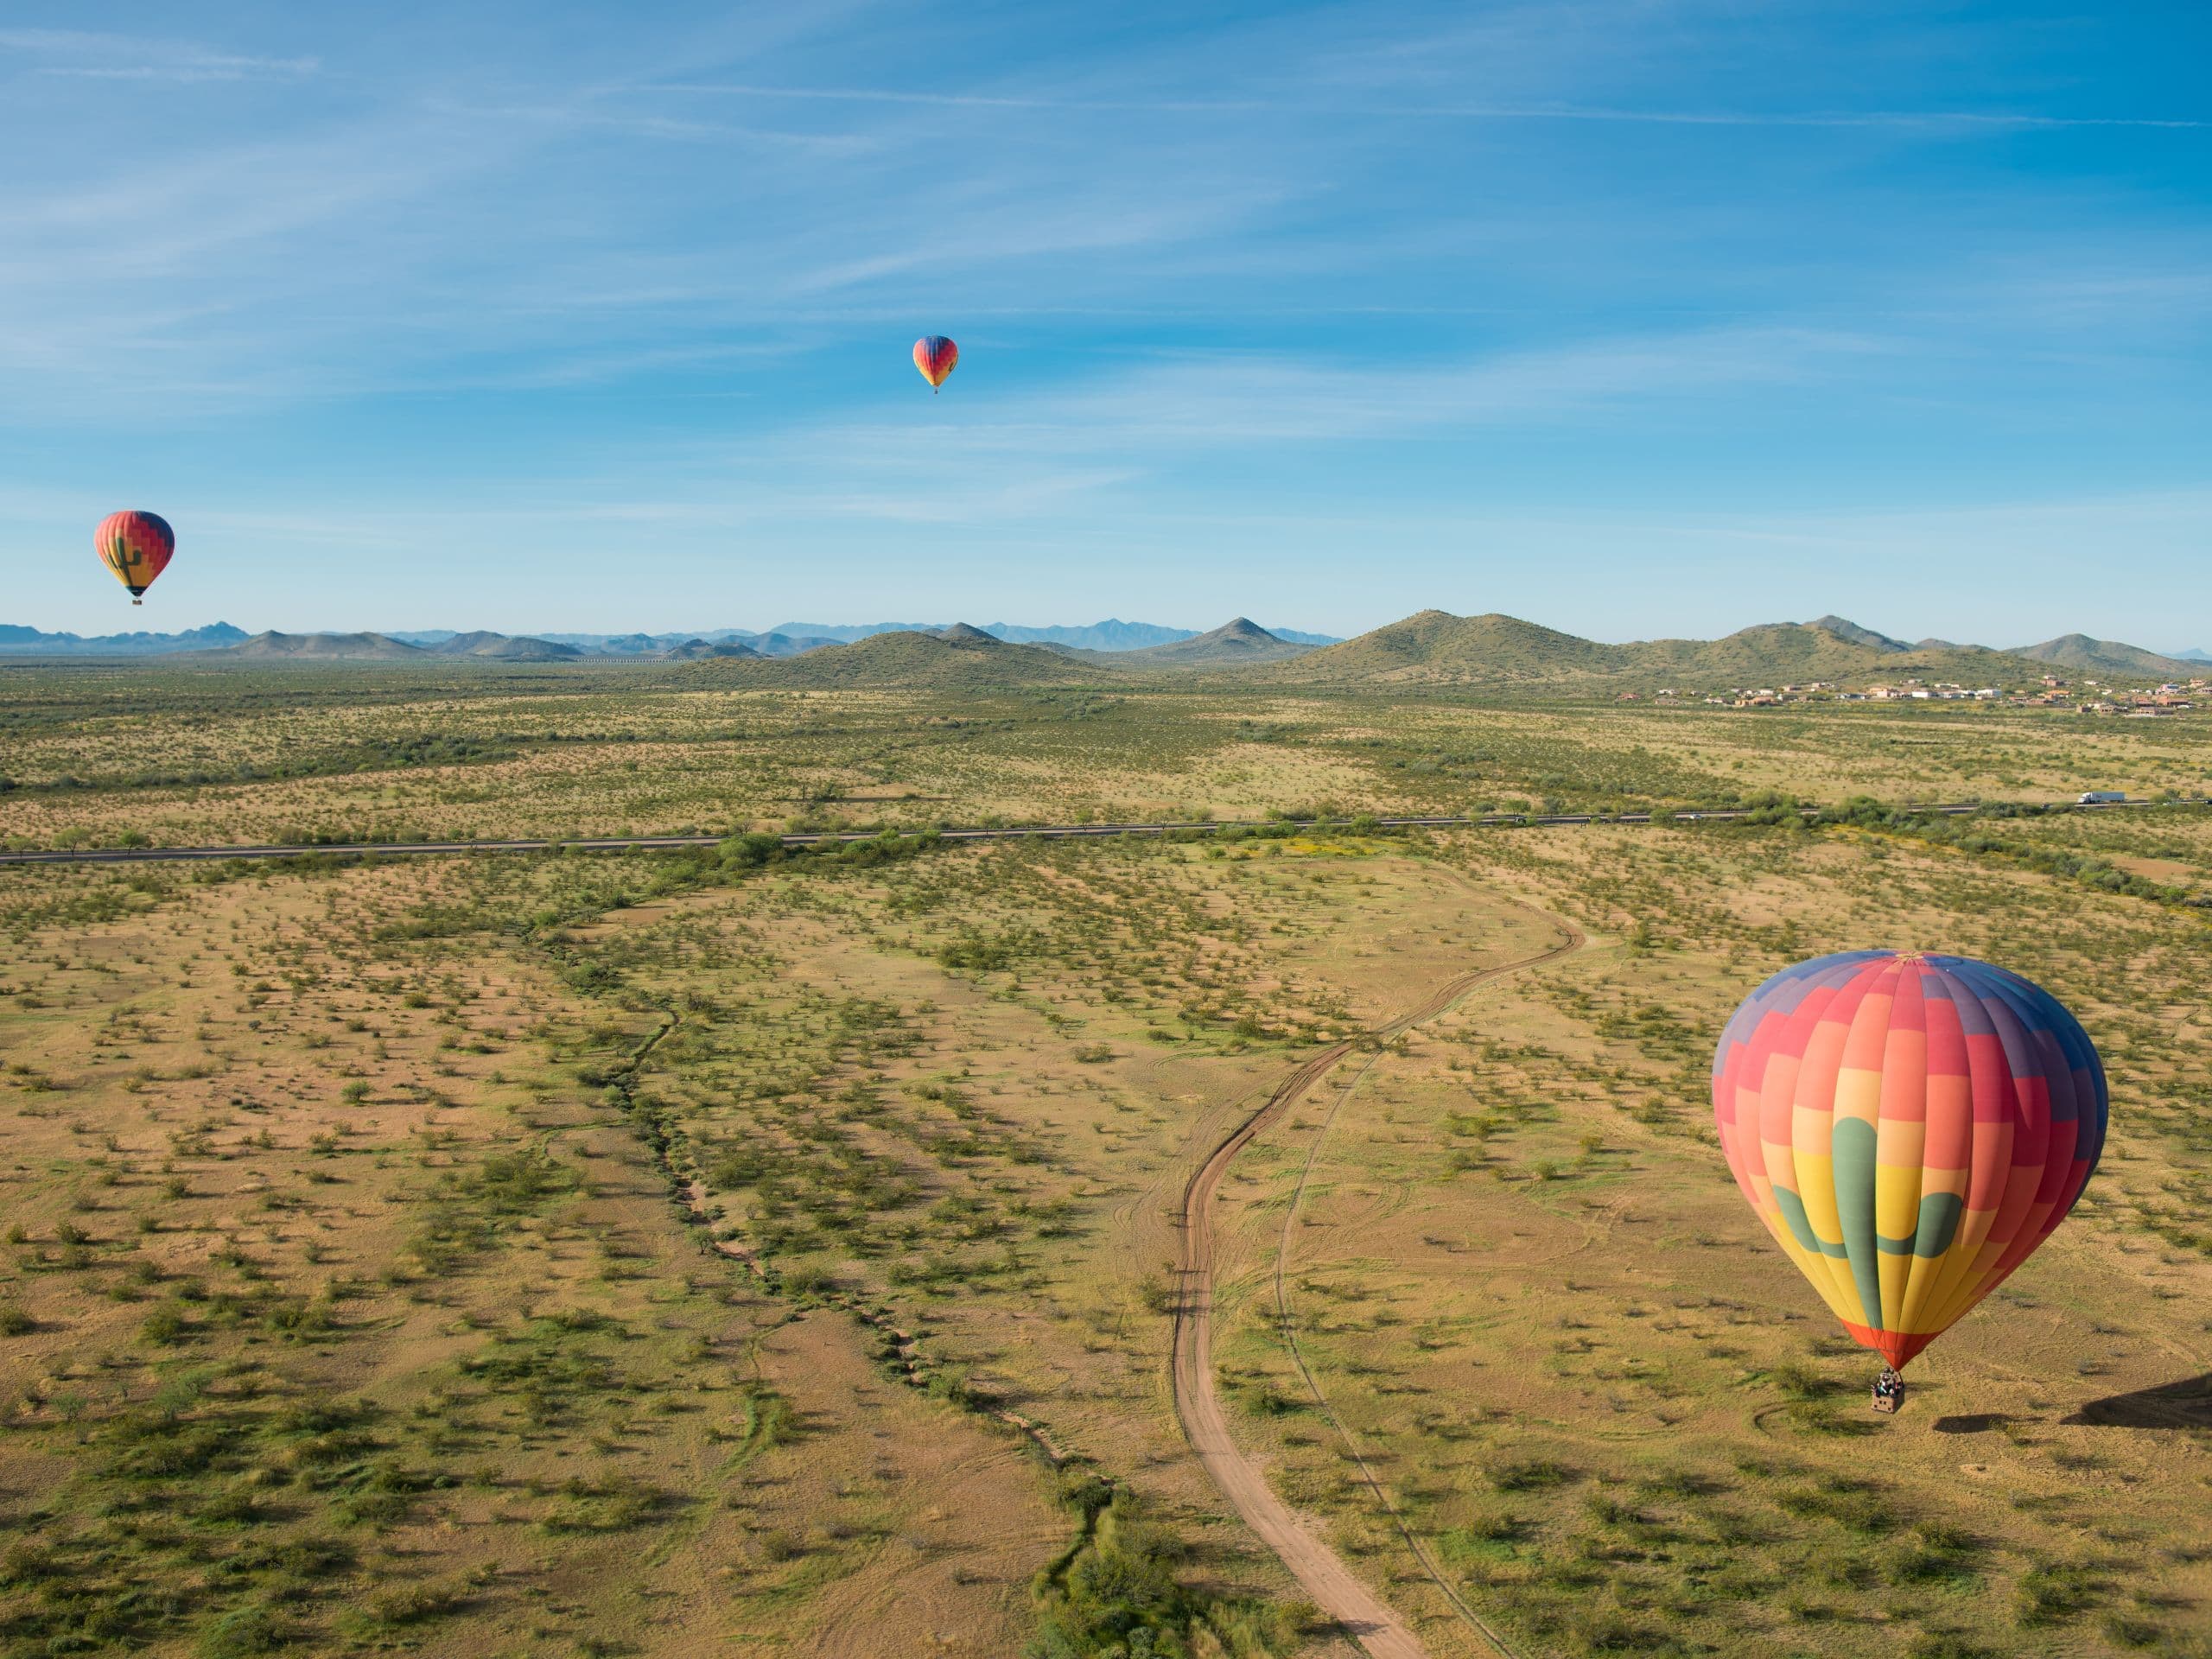 Andaz Scottsdale Resort & Bungalows Hot Air Expeditions